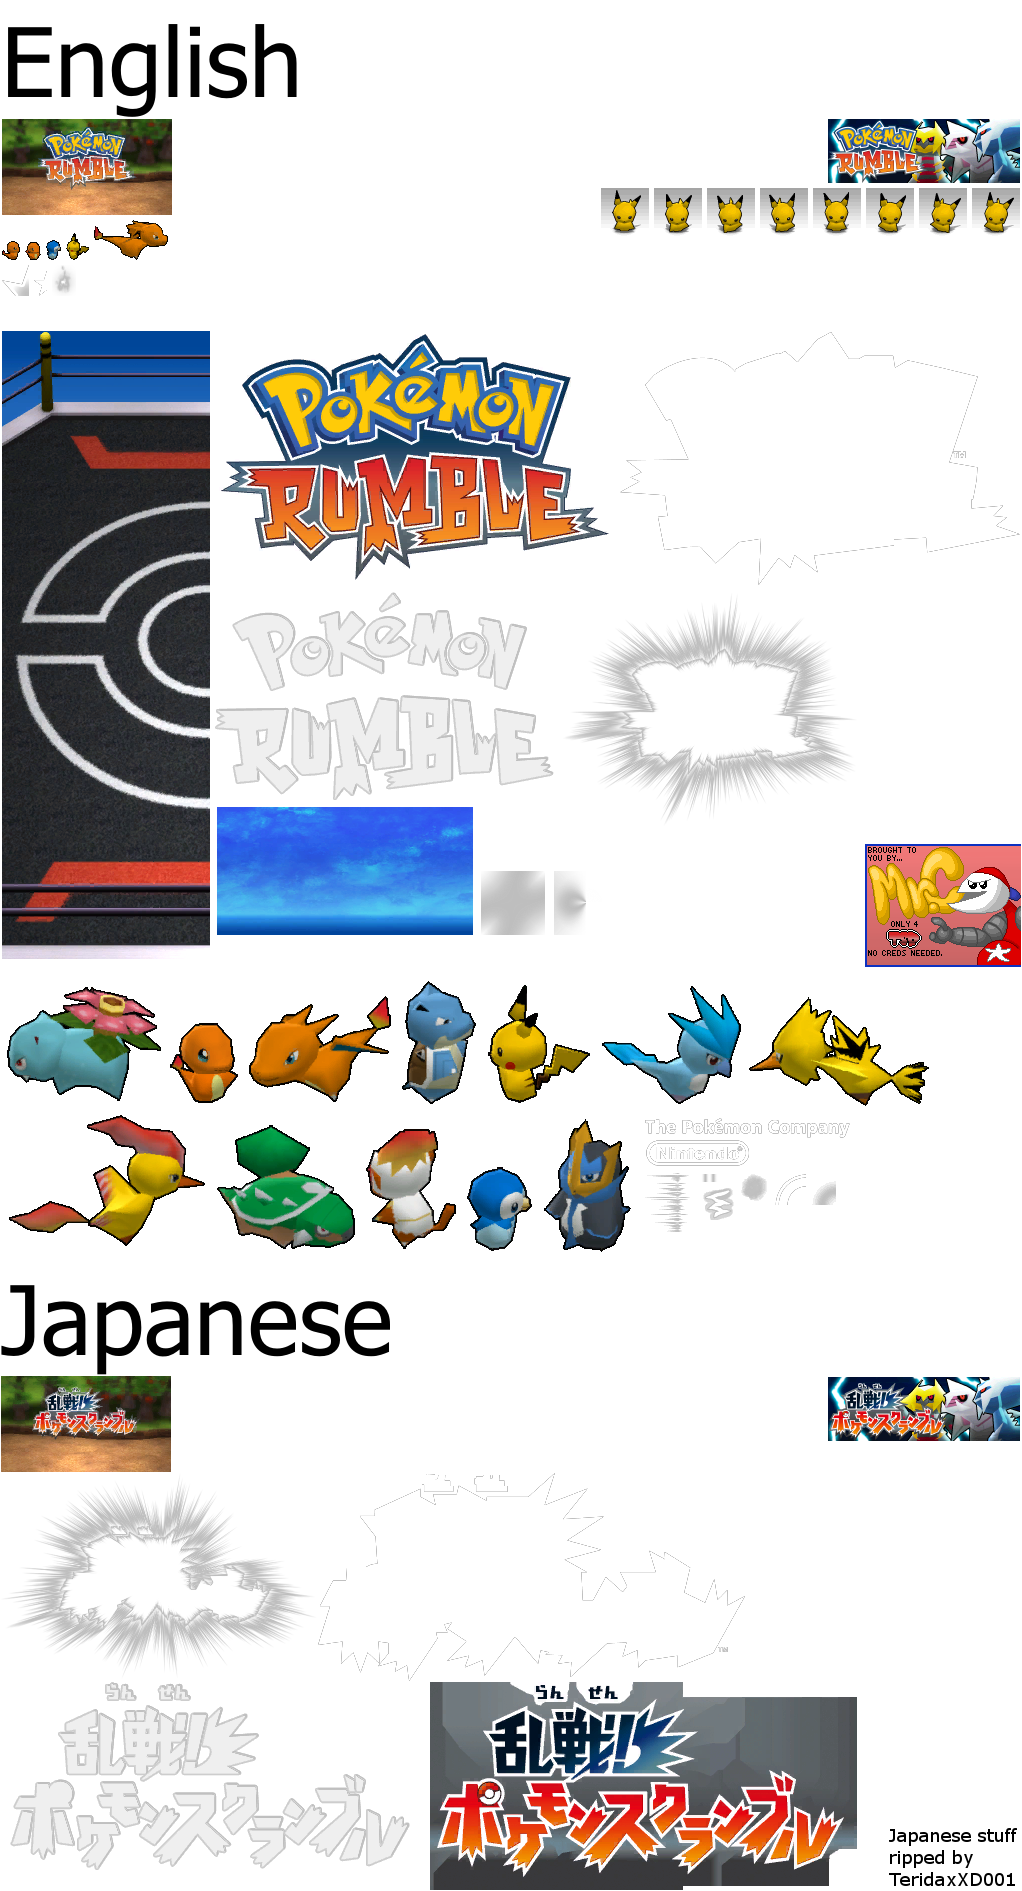 Pokémon Rumble - Wii Banner and Memory Data